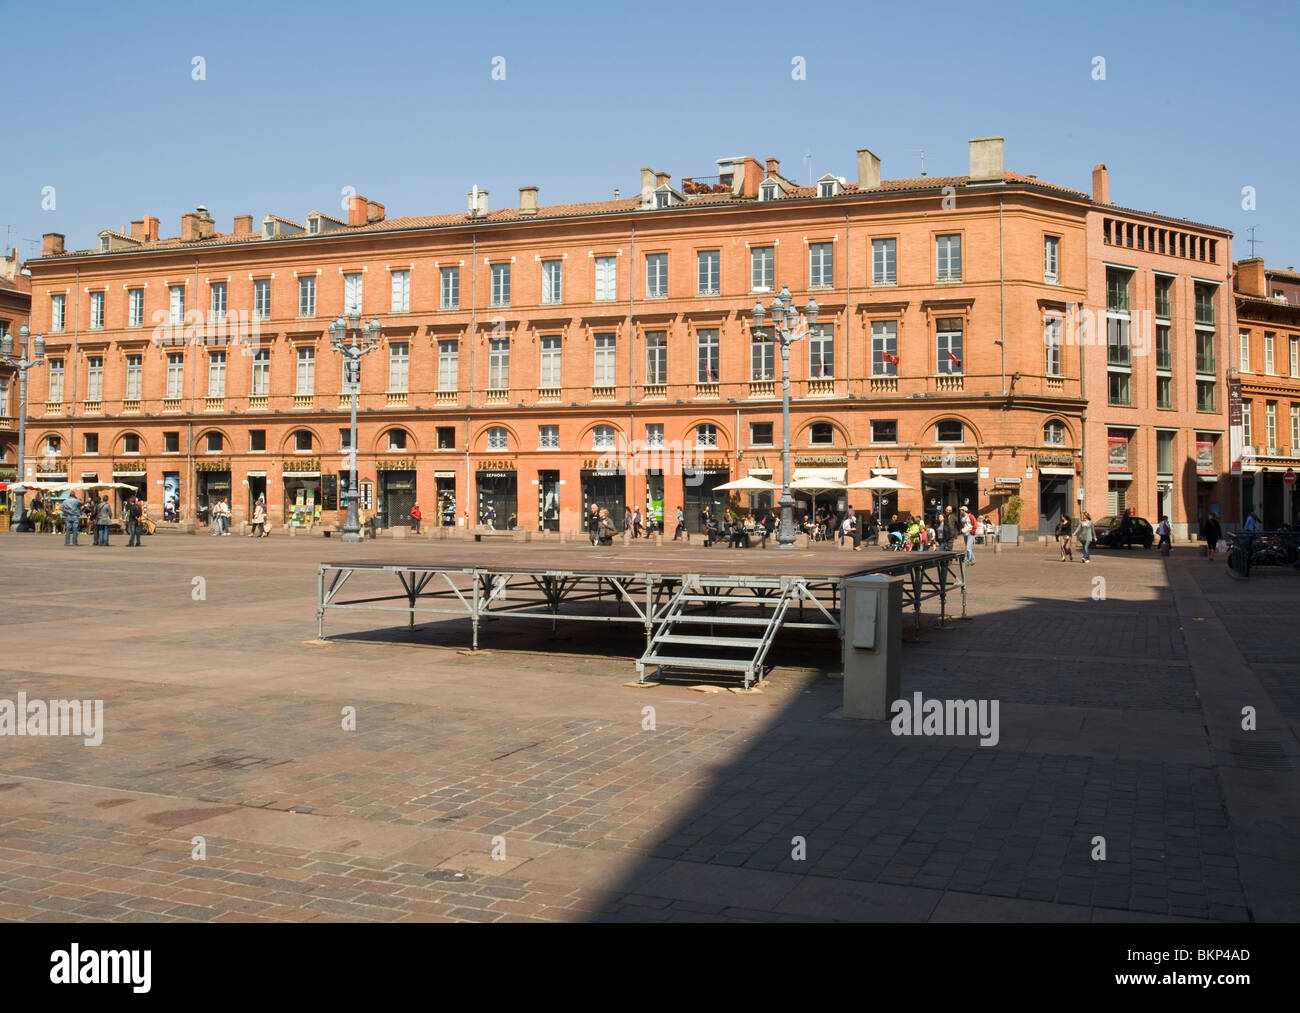 The Beautiful Architecture in Place du Capitole [Capital Square] with Shops and Office Buildings Toulouse Haute-Garonne France Stock Photo